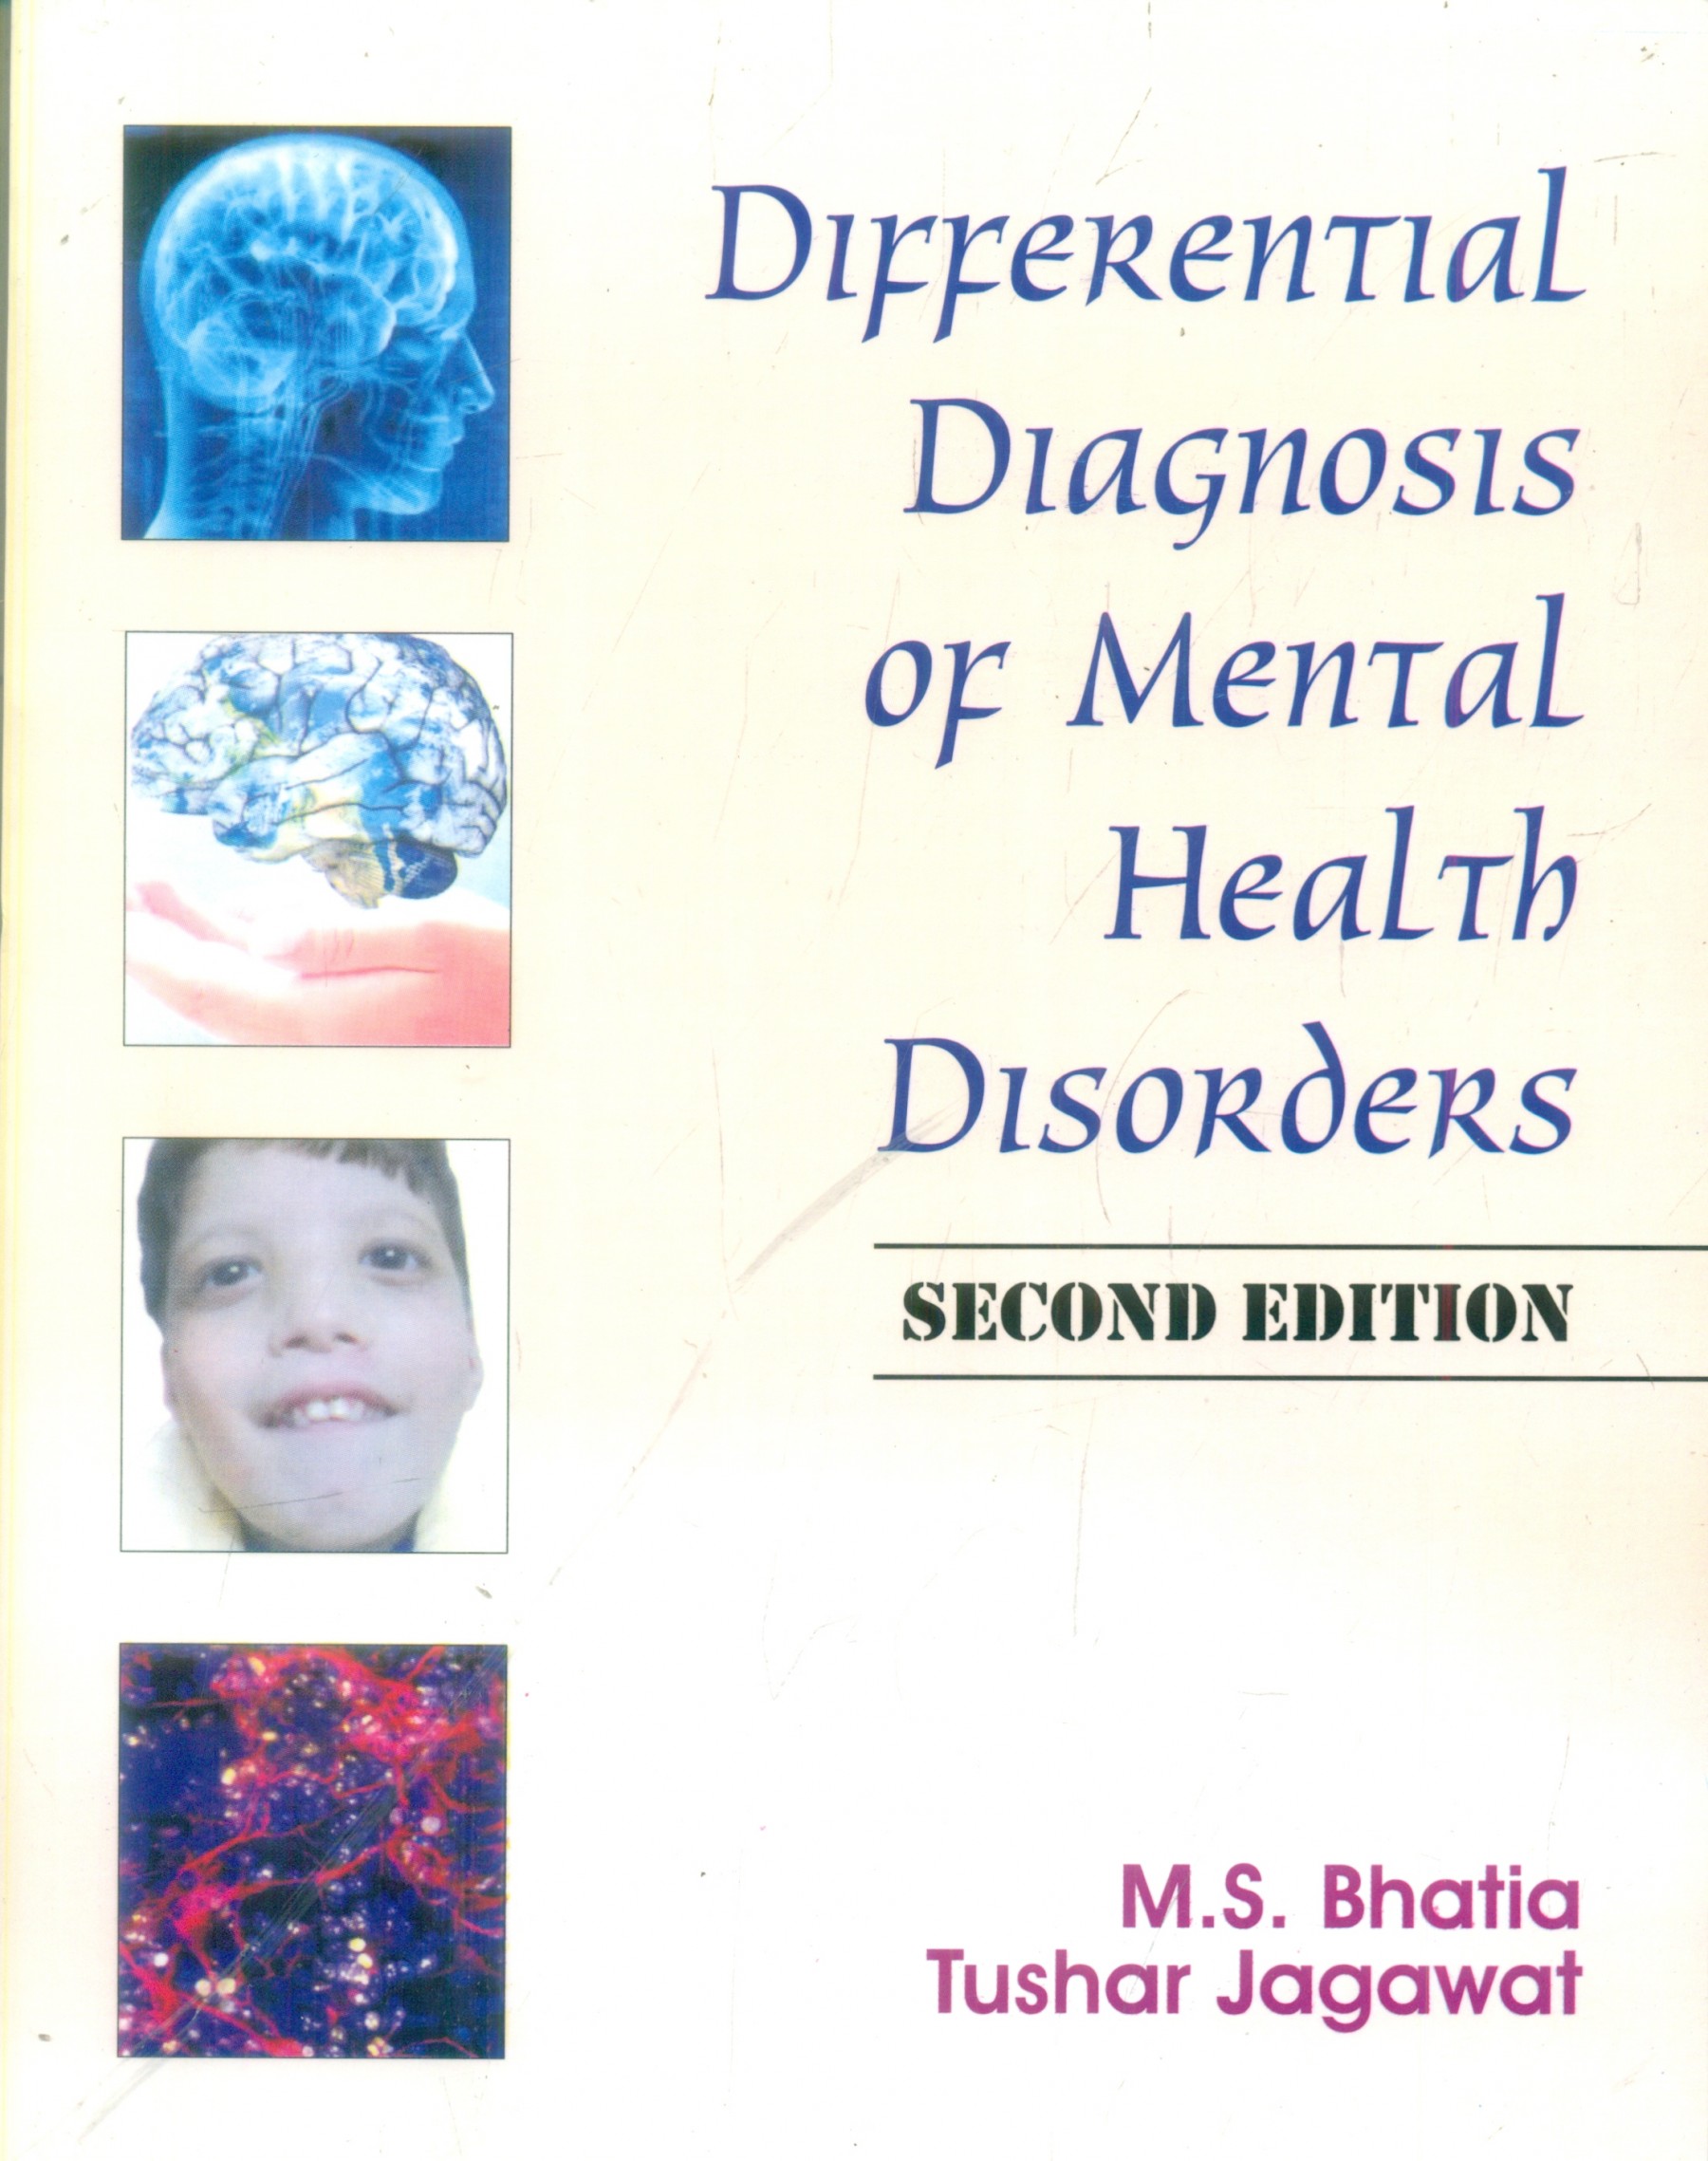 DIFFERENTIAL DIAGNOSIS OF MENTAL HEALTH DISORDERS 2ED 